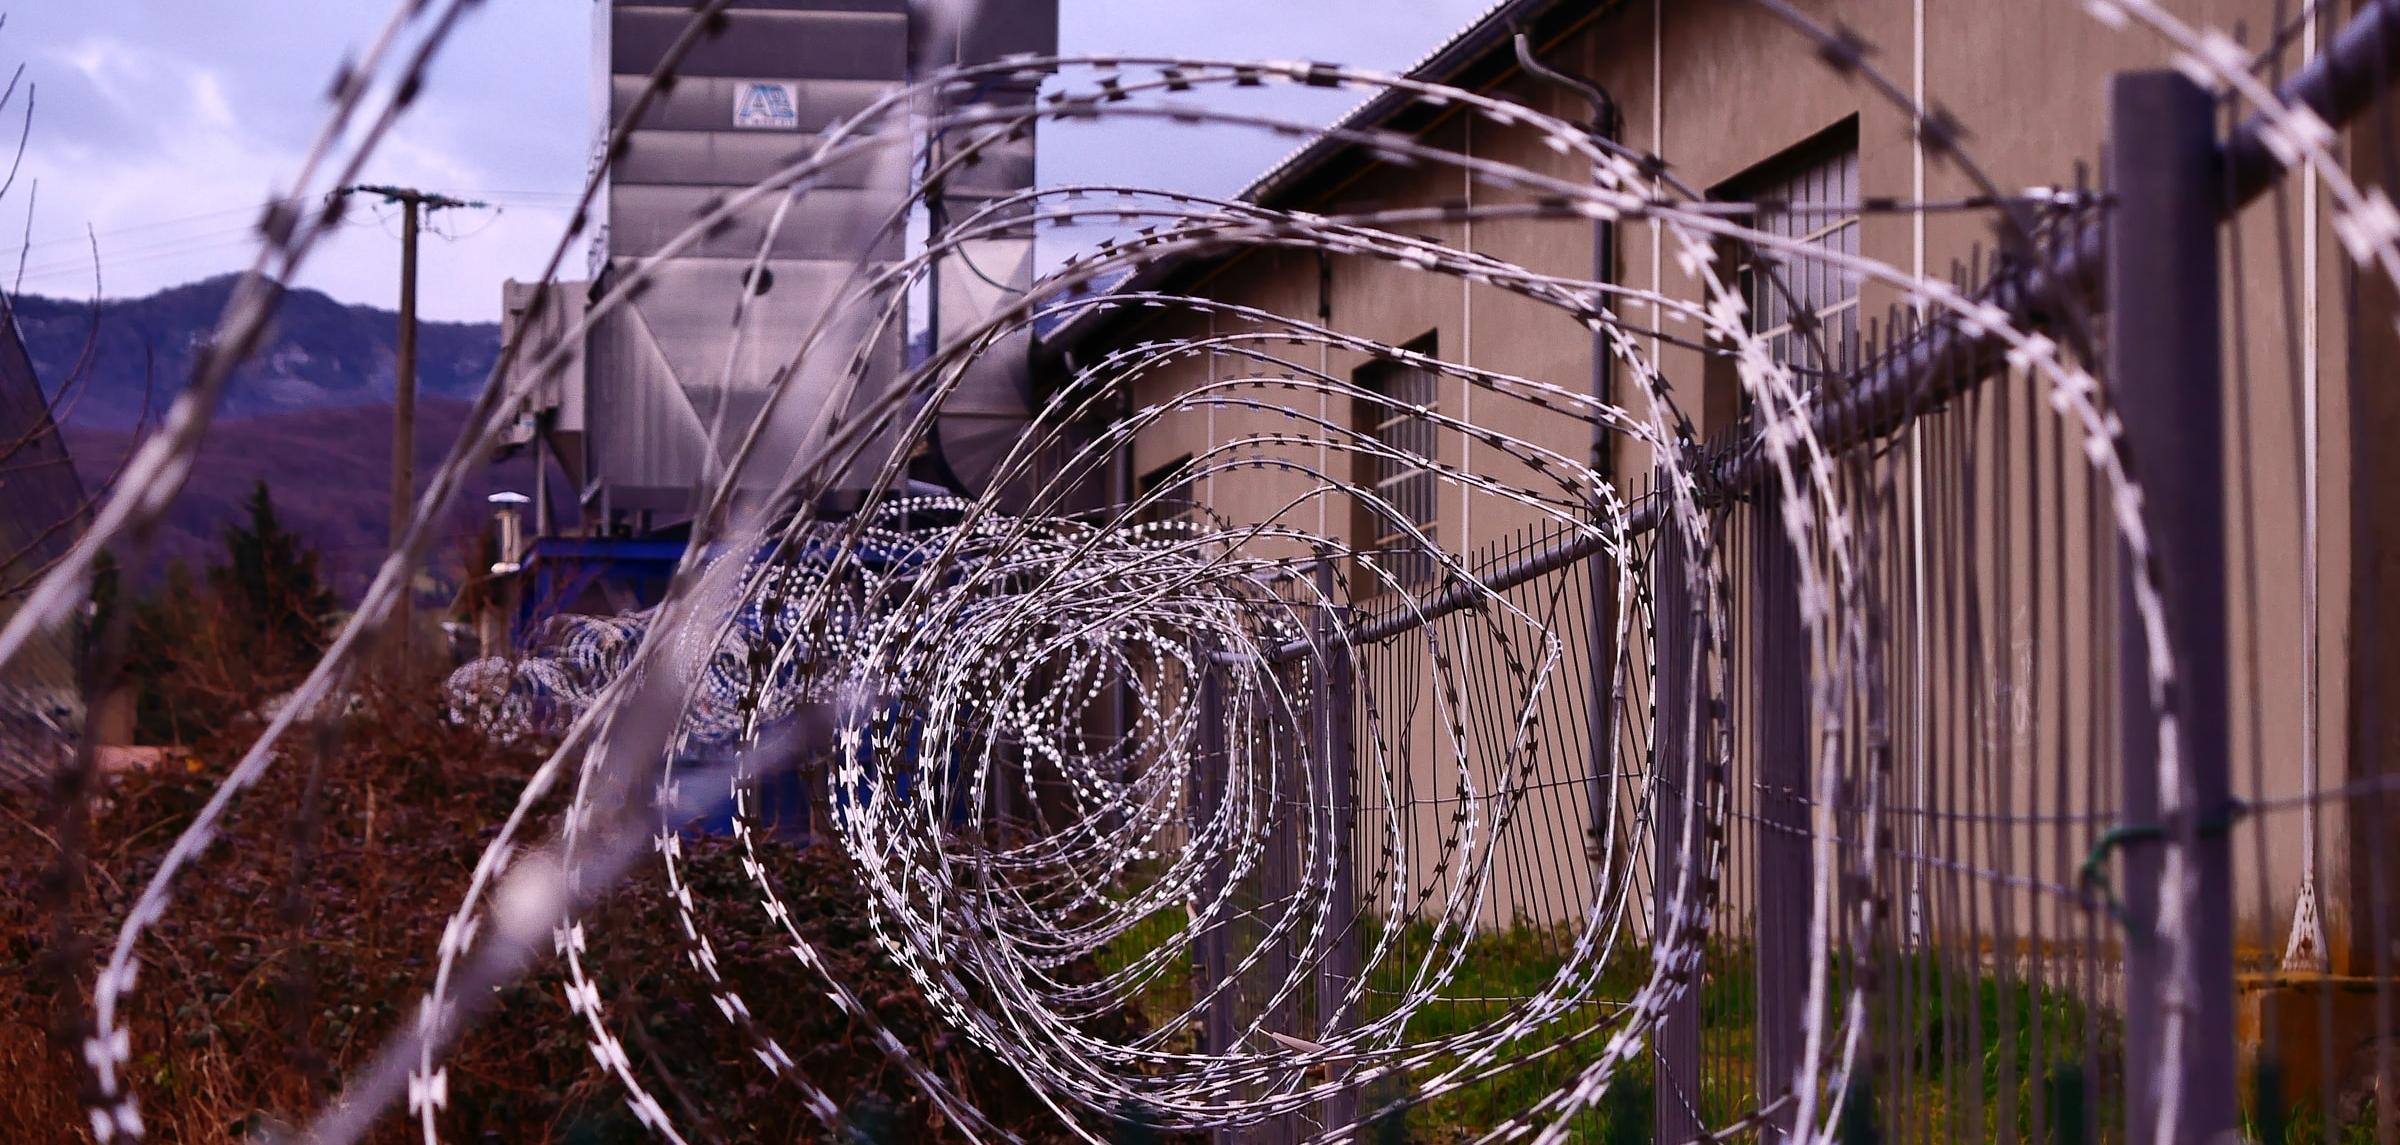 Barbed wire in a spiral form outside a brown building.